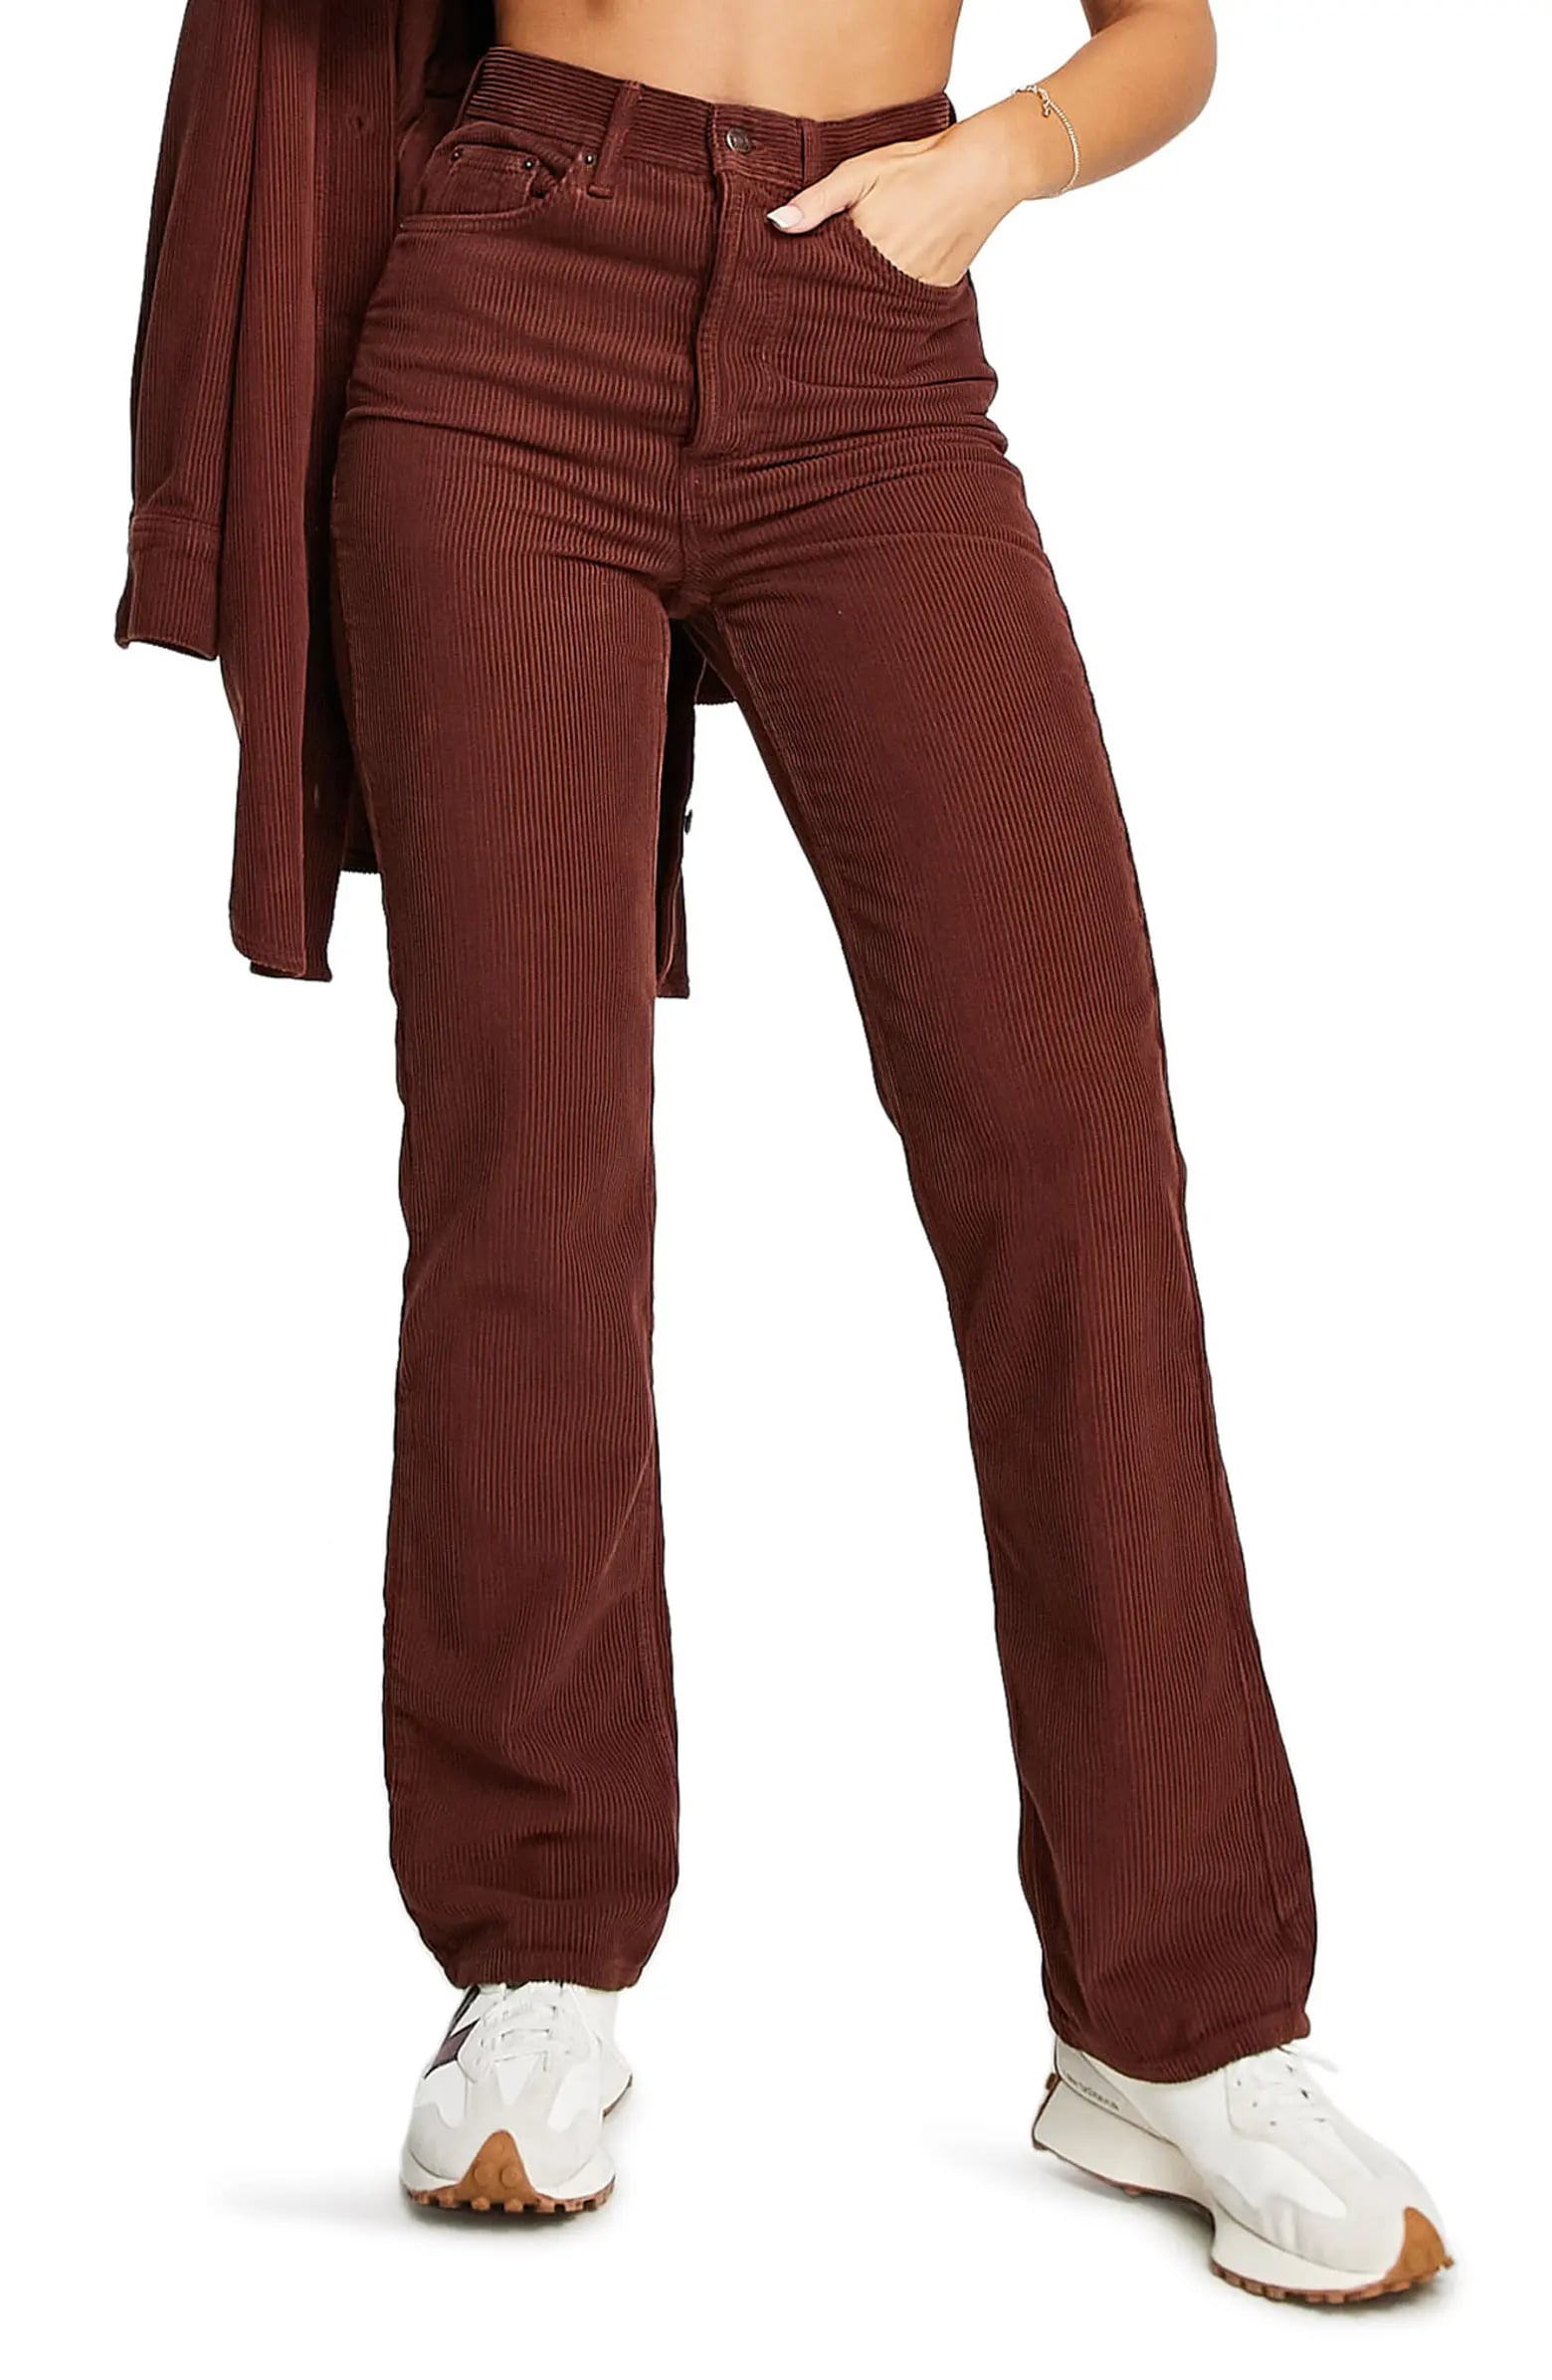 Best Corduroy Pants with Pockets: Topshop Kort High Waist Corduroy Pants, 13 Corduroy Pants Our Editors Are Loving For Fall